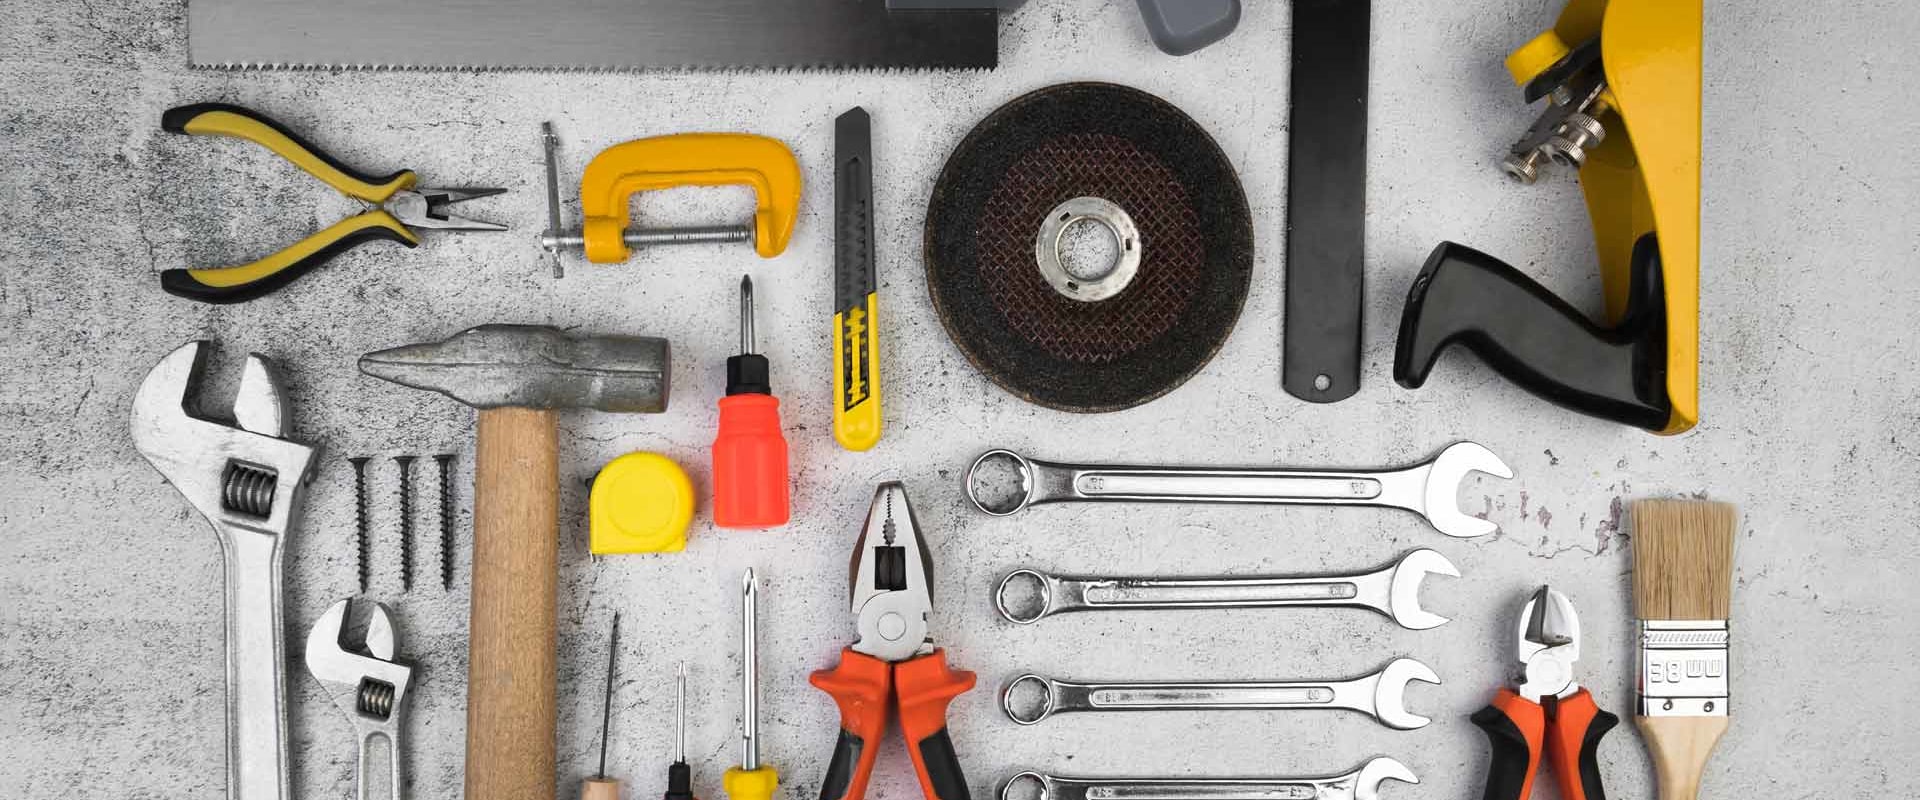 Will pawn shops buy hand tools?